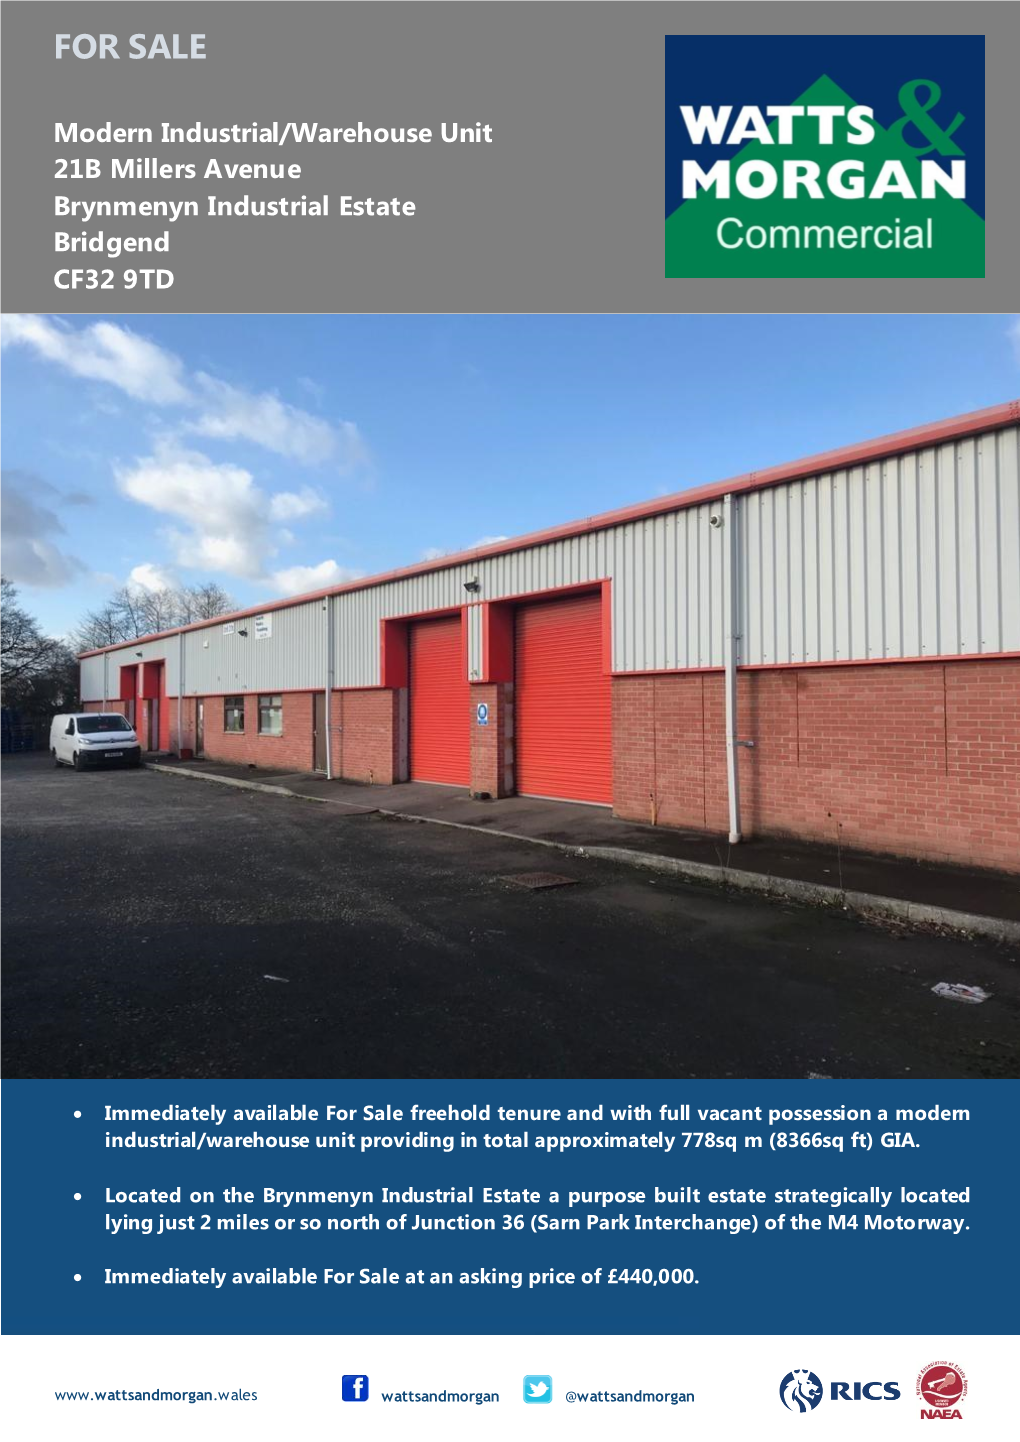 FOR SALE Modern Industrial/Warehouse